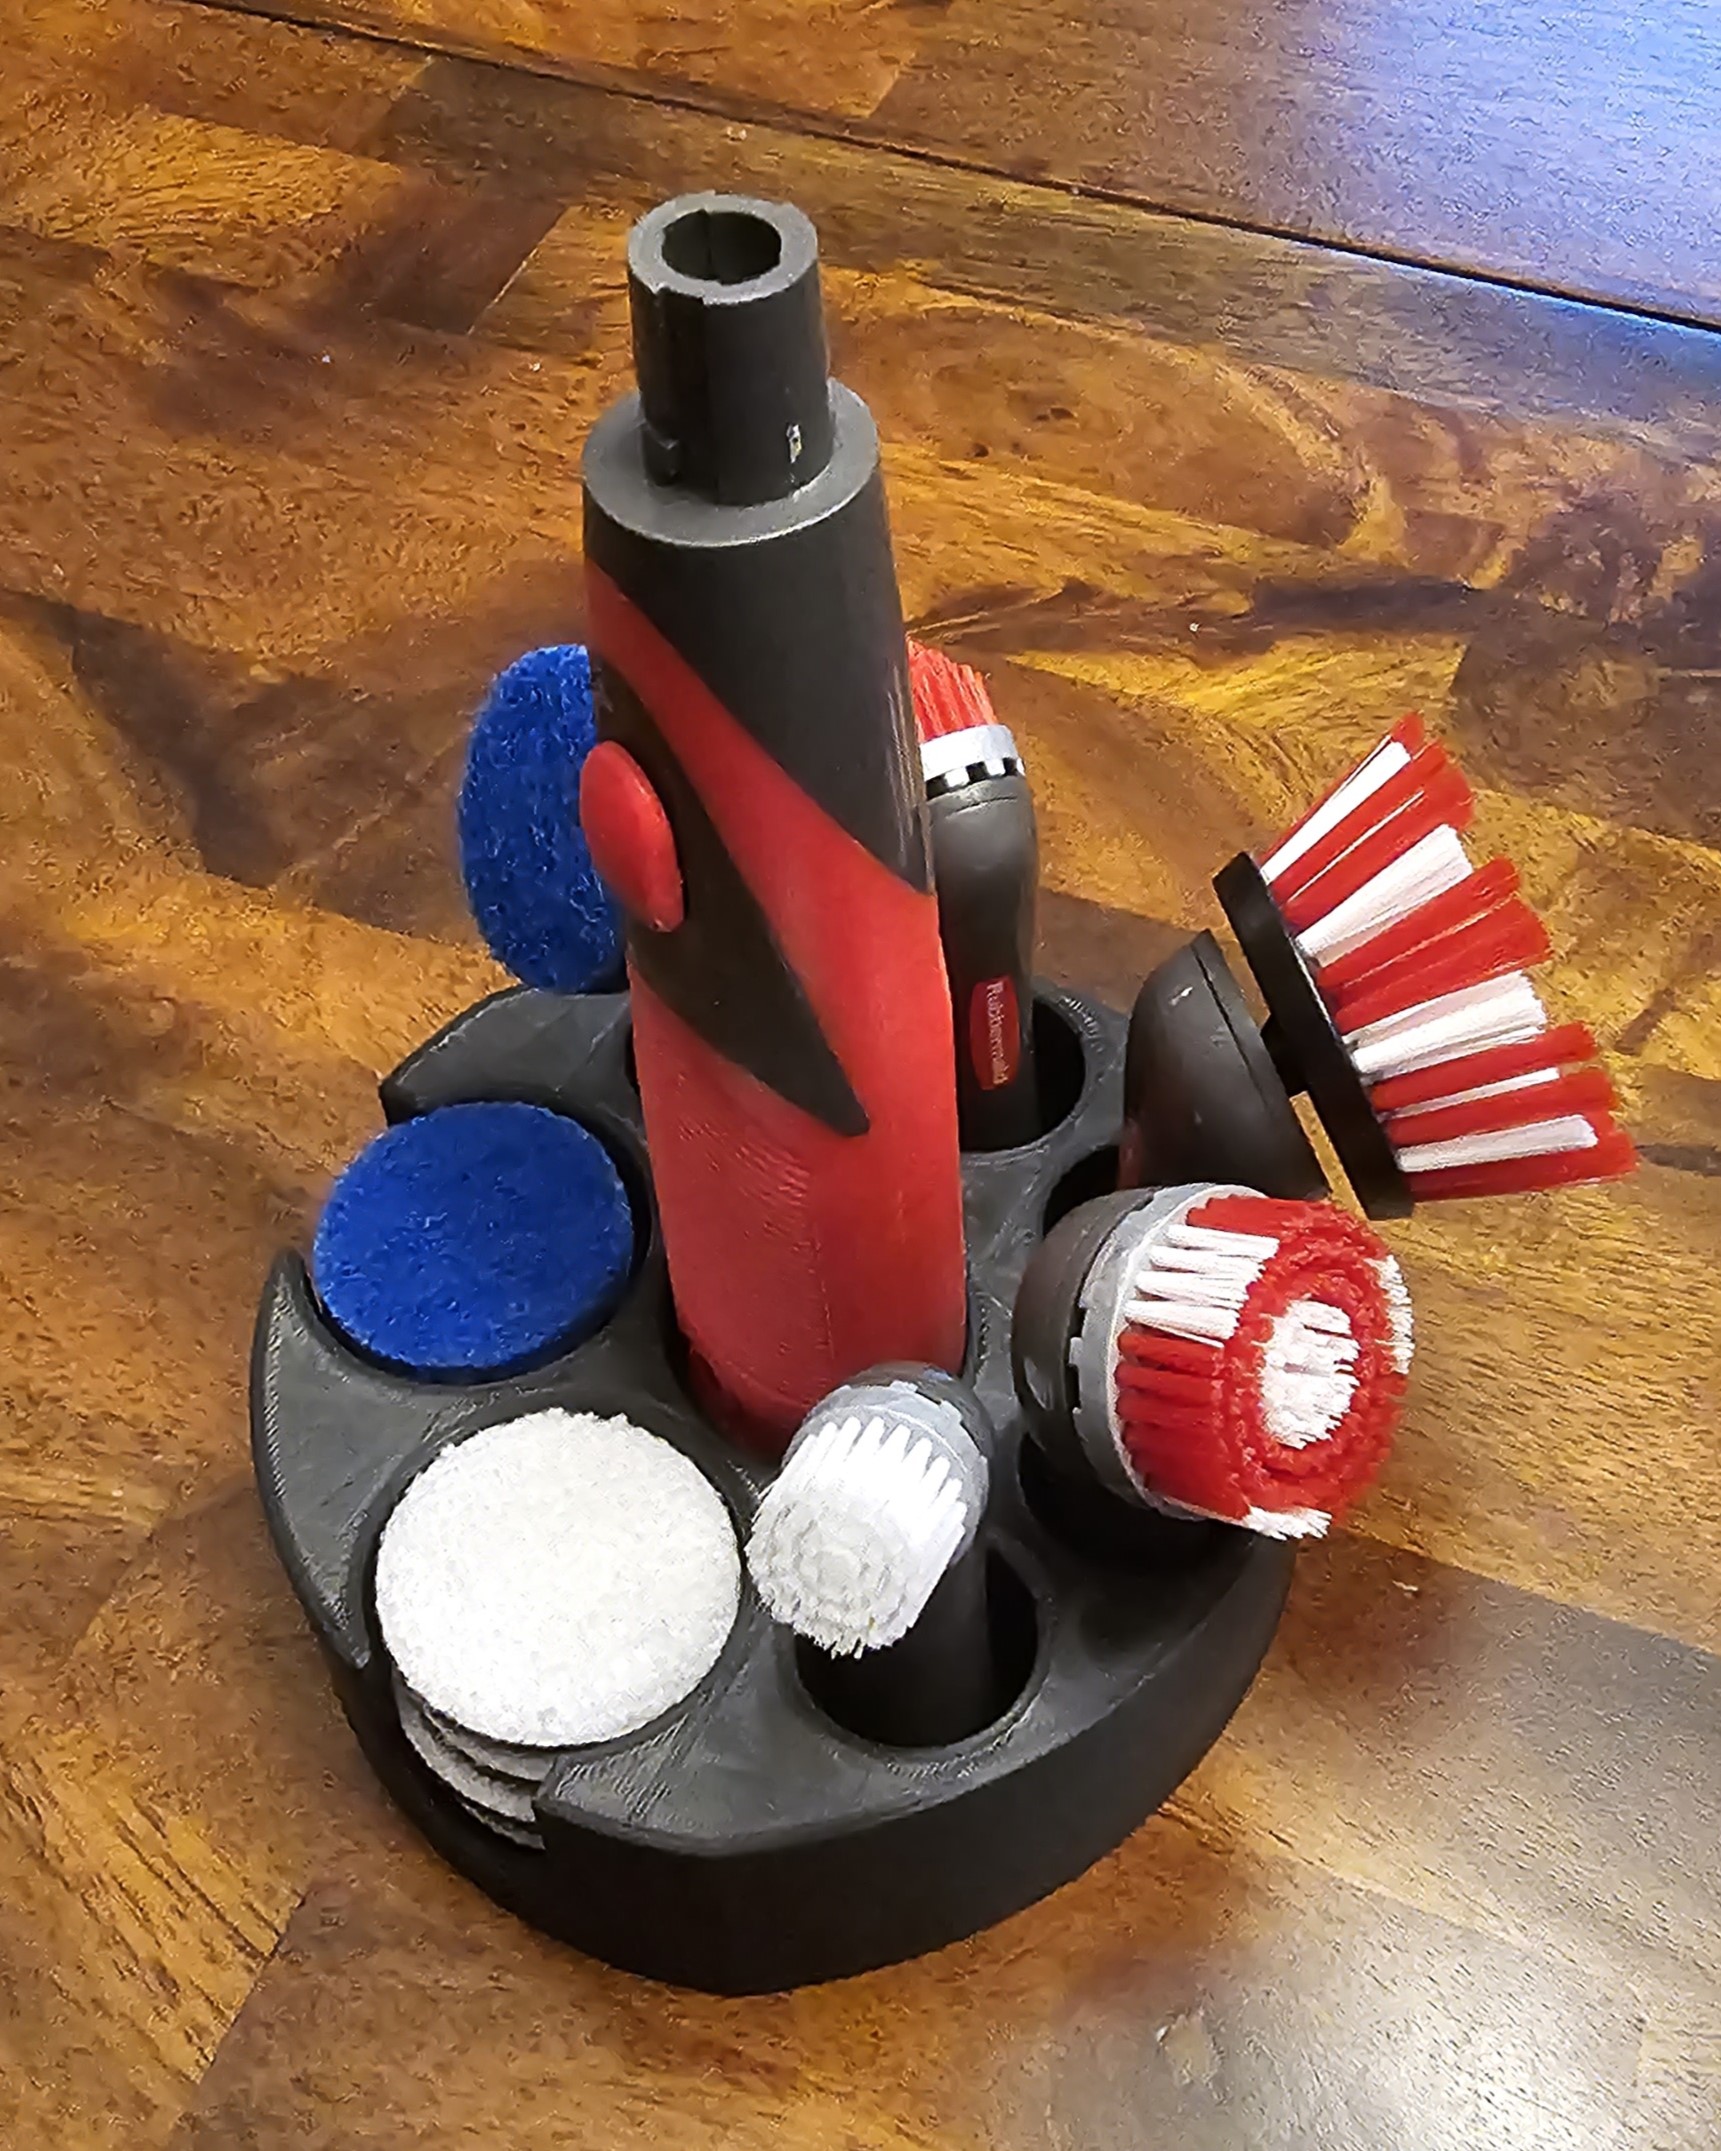 Rubbermaid Reveal Cordless Battery Power Scrubber Stand by SupaFletch, Download free STL model